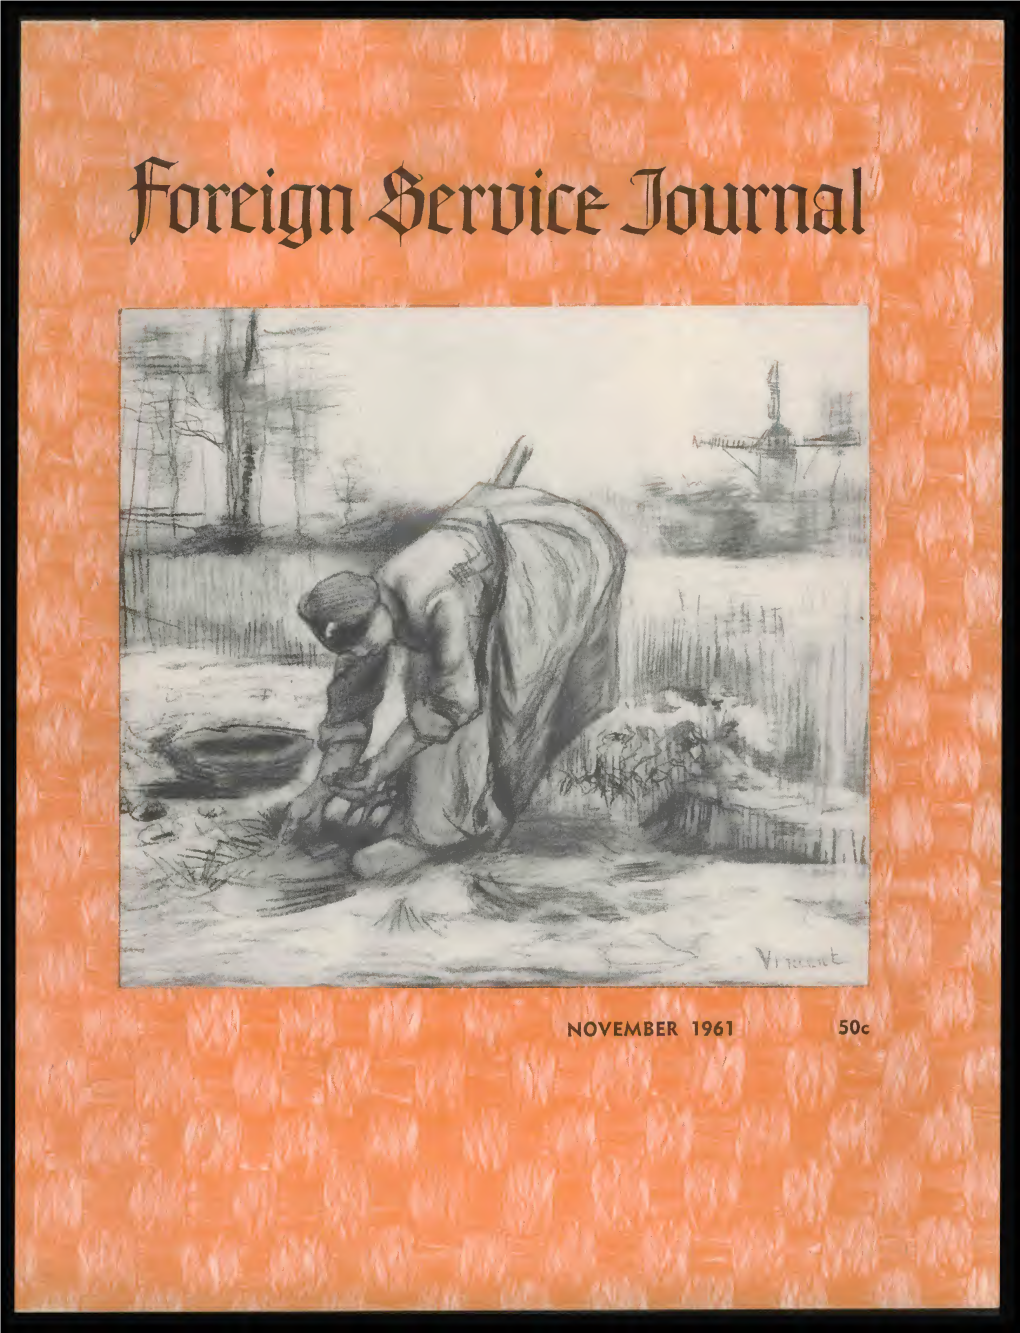 The Foreign Service Journal, November 1961